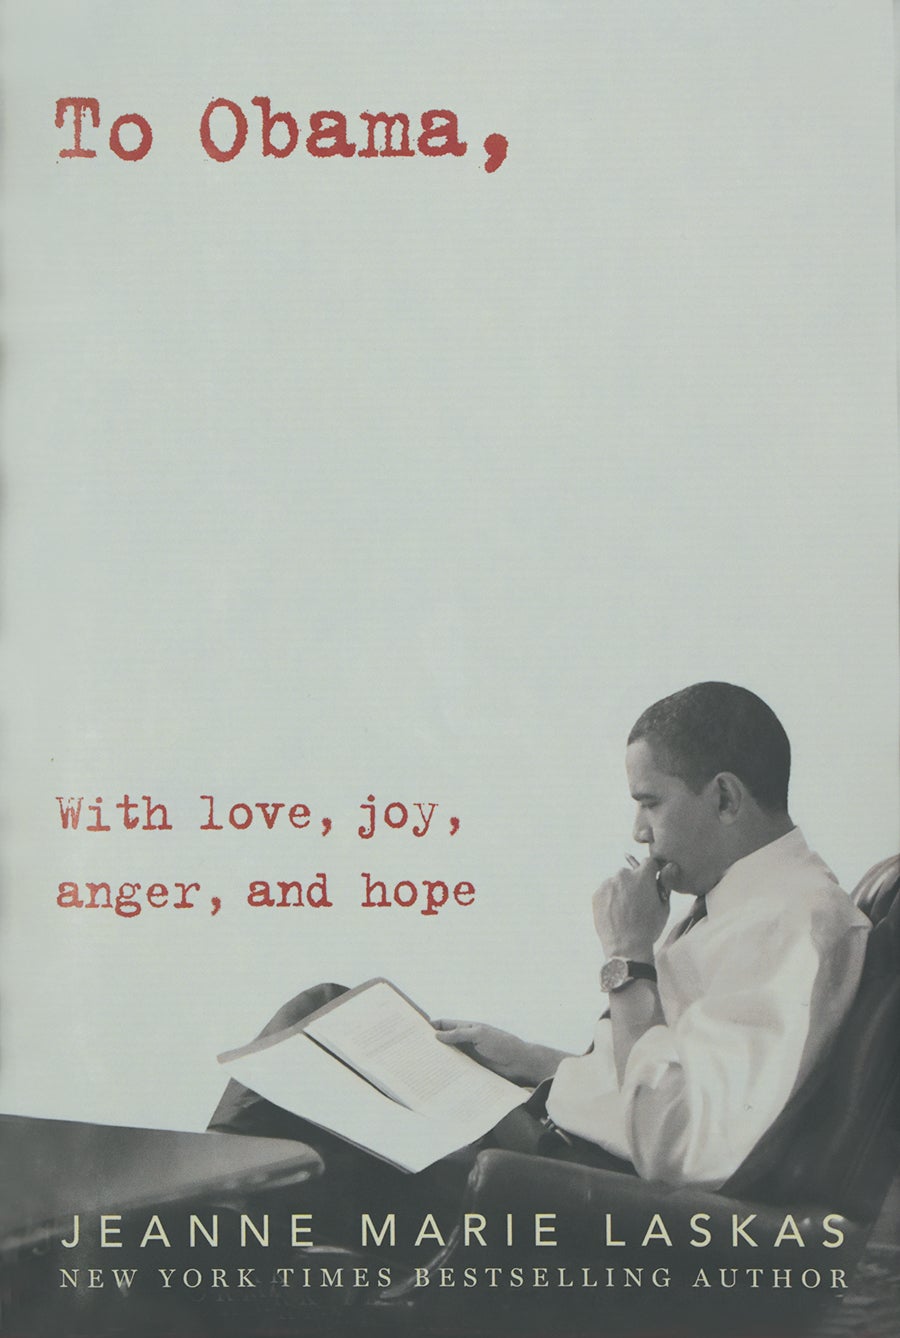 Cover of Jeanne Marie Laskas's book To Obama, With Love, Joy, Anger, and Hope